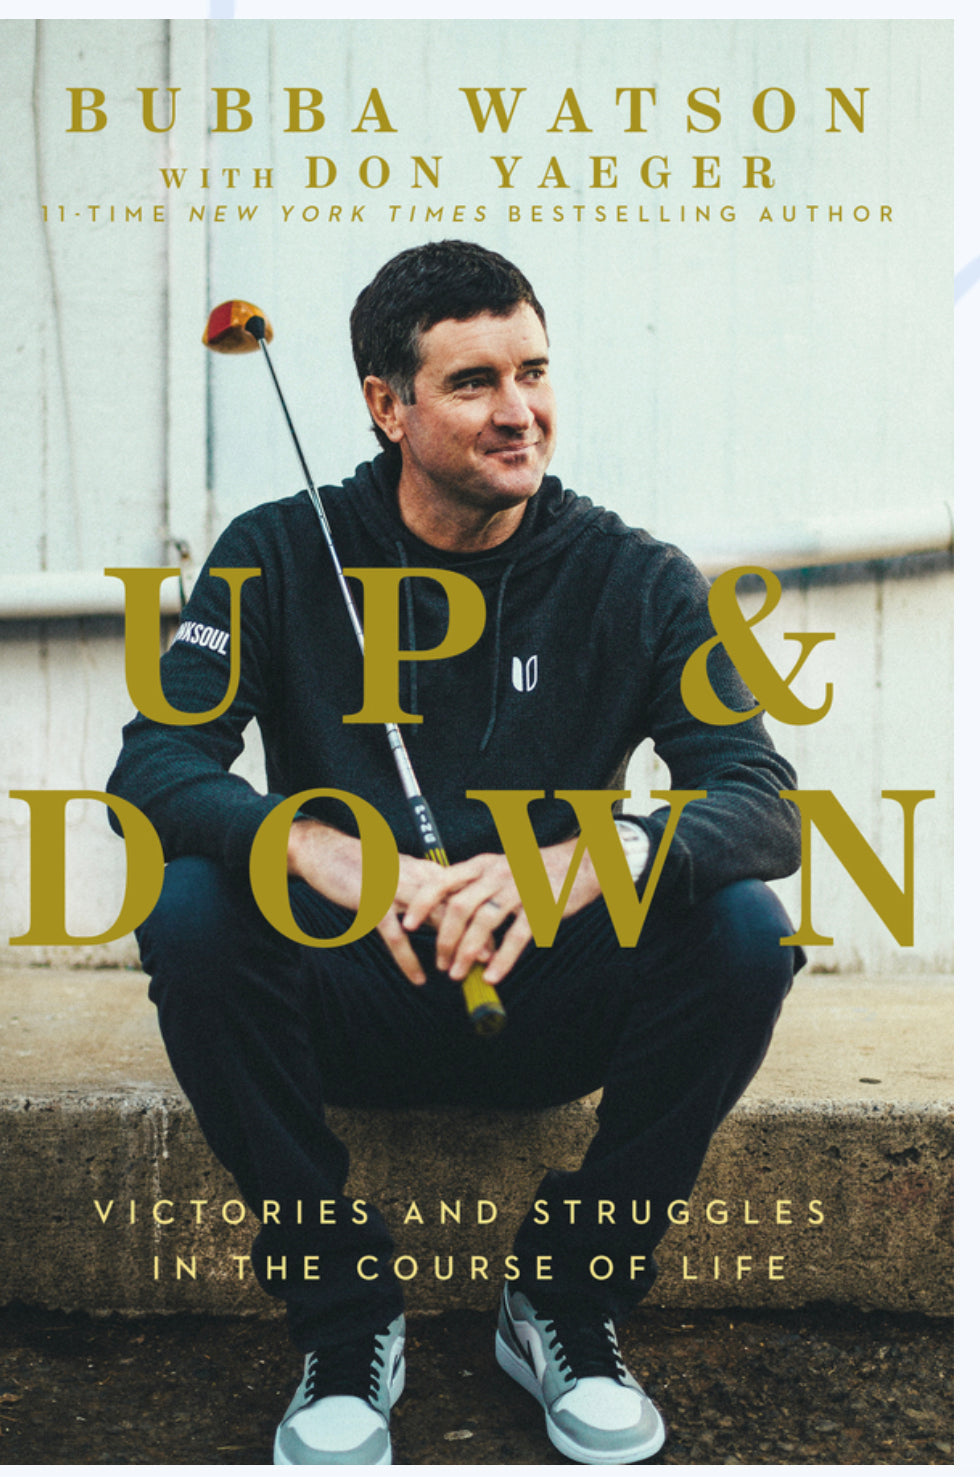 Up and Down: Victories and Struggles in the Course of Life